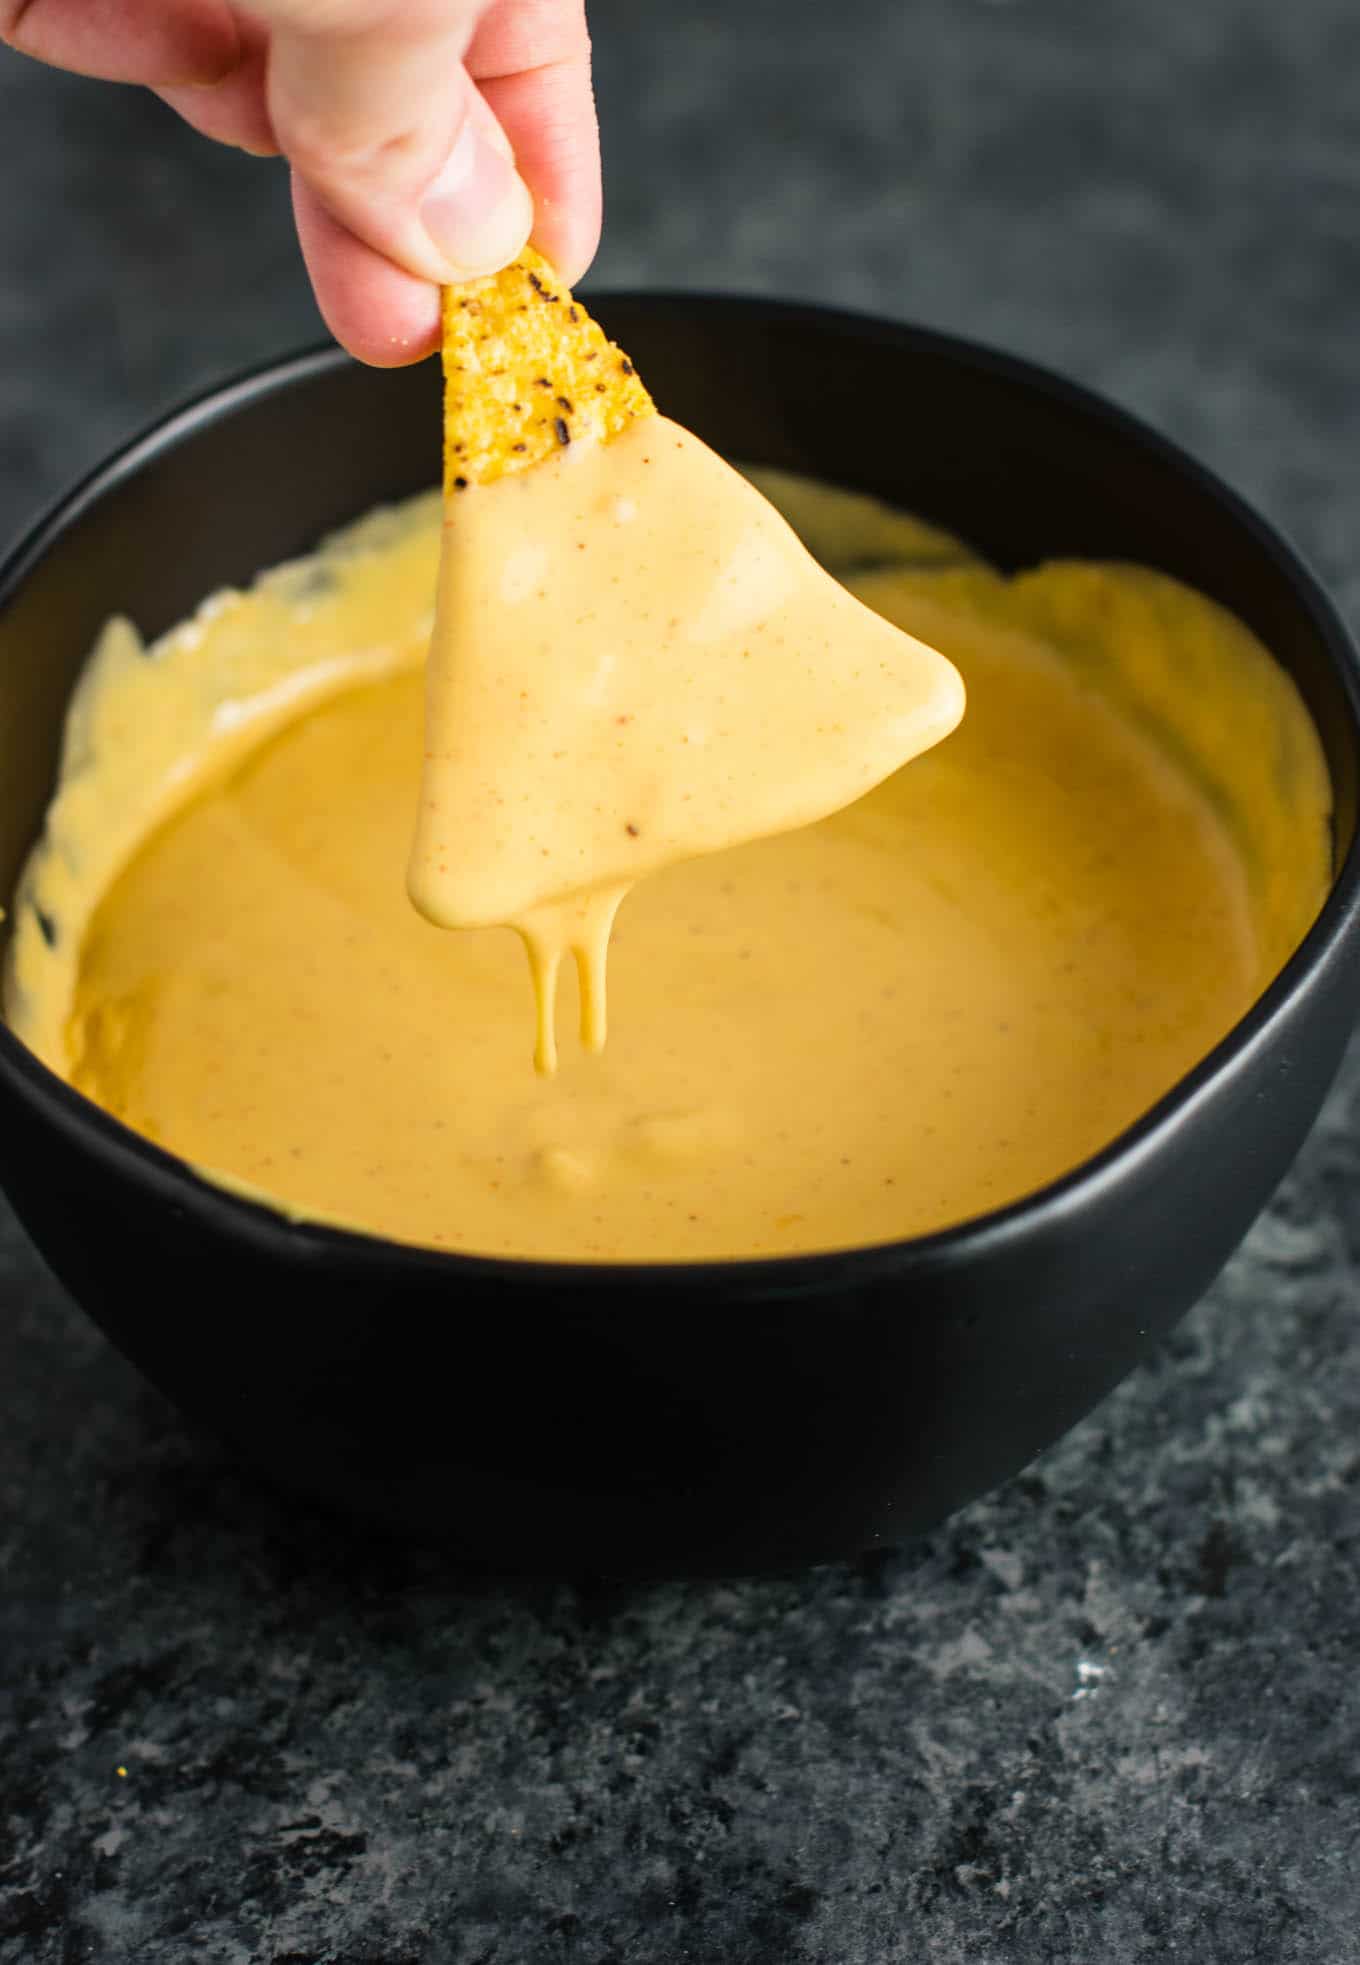 5 minute nacho cheese sauce recipe. Perfect for dipping, or poured over nachos! Just 6 ingredients! #nachocheesesauce #vegetarian #mexicanfood